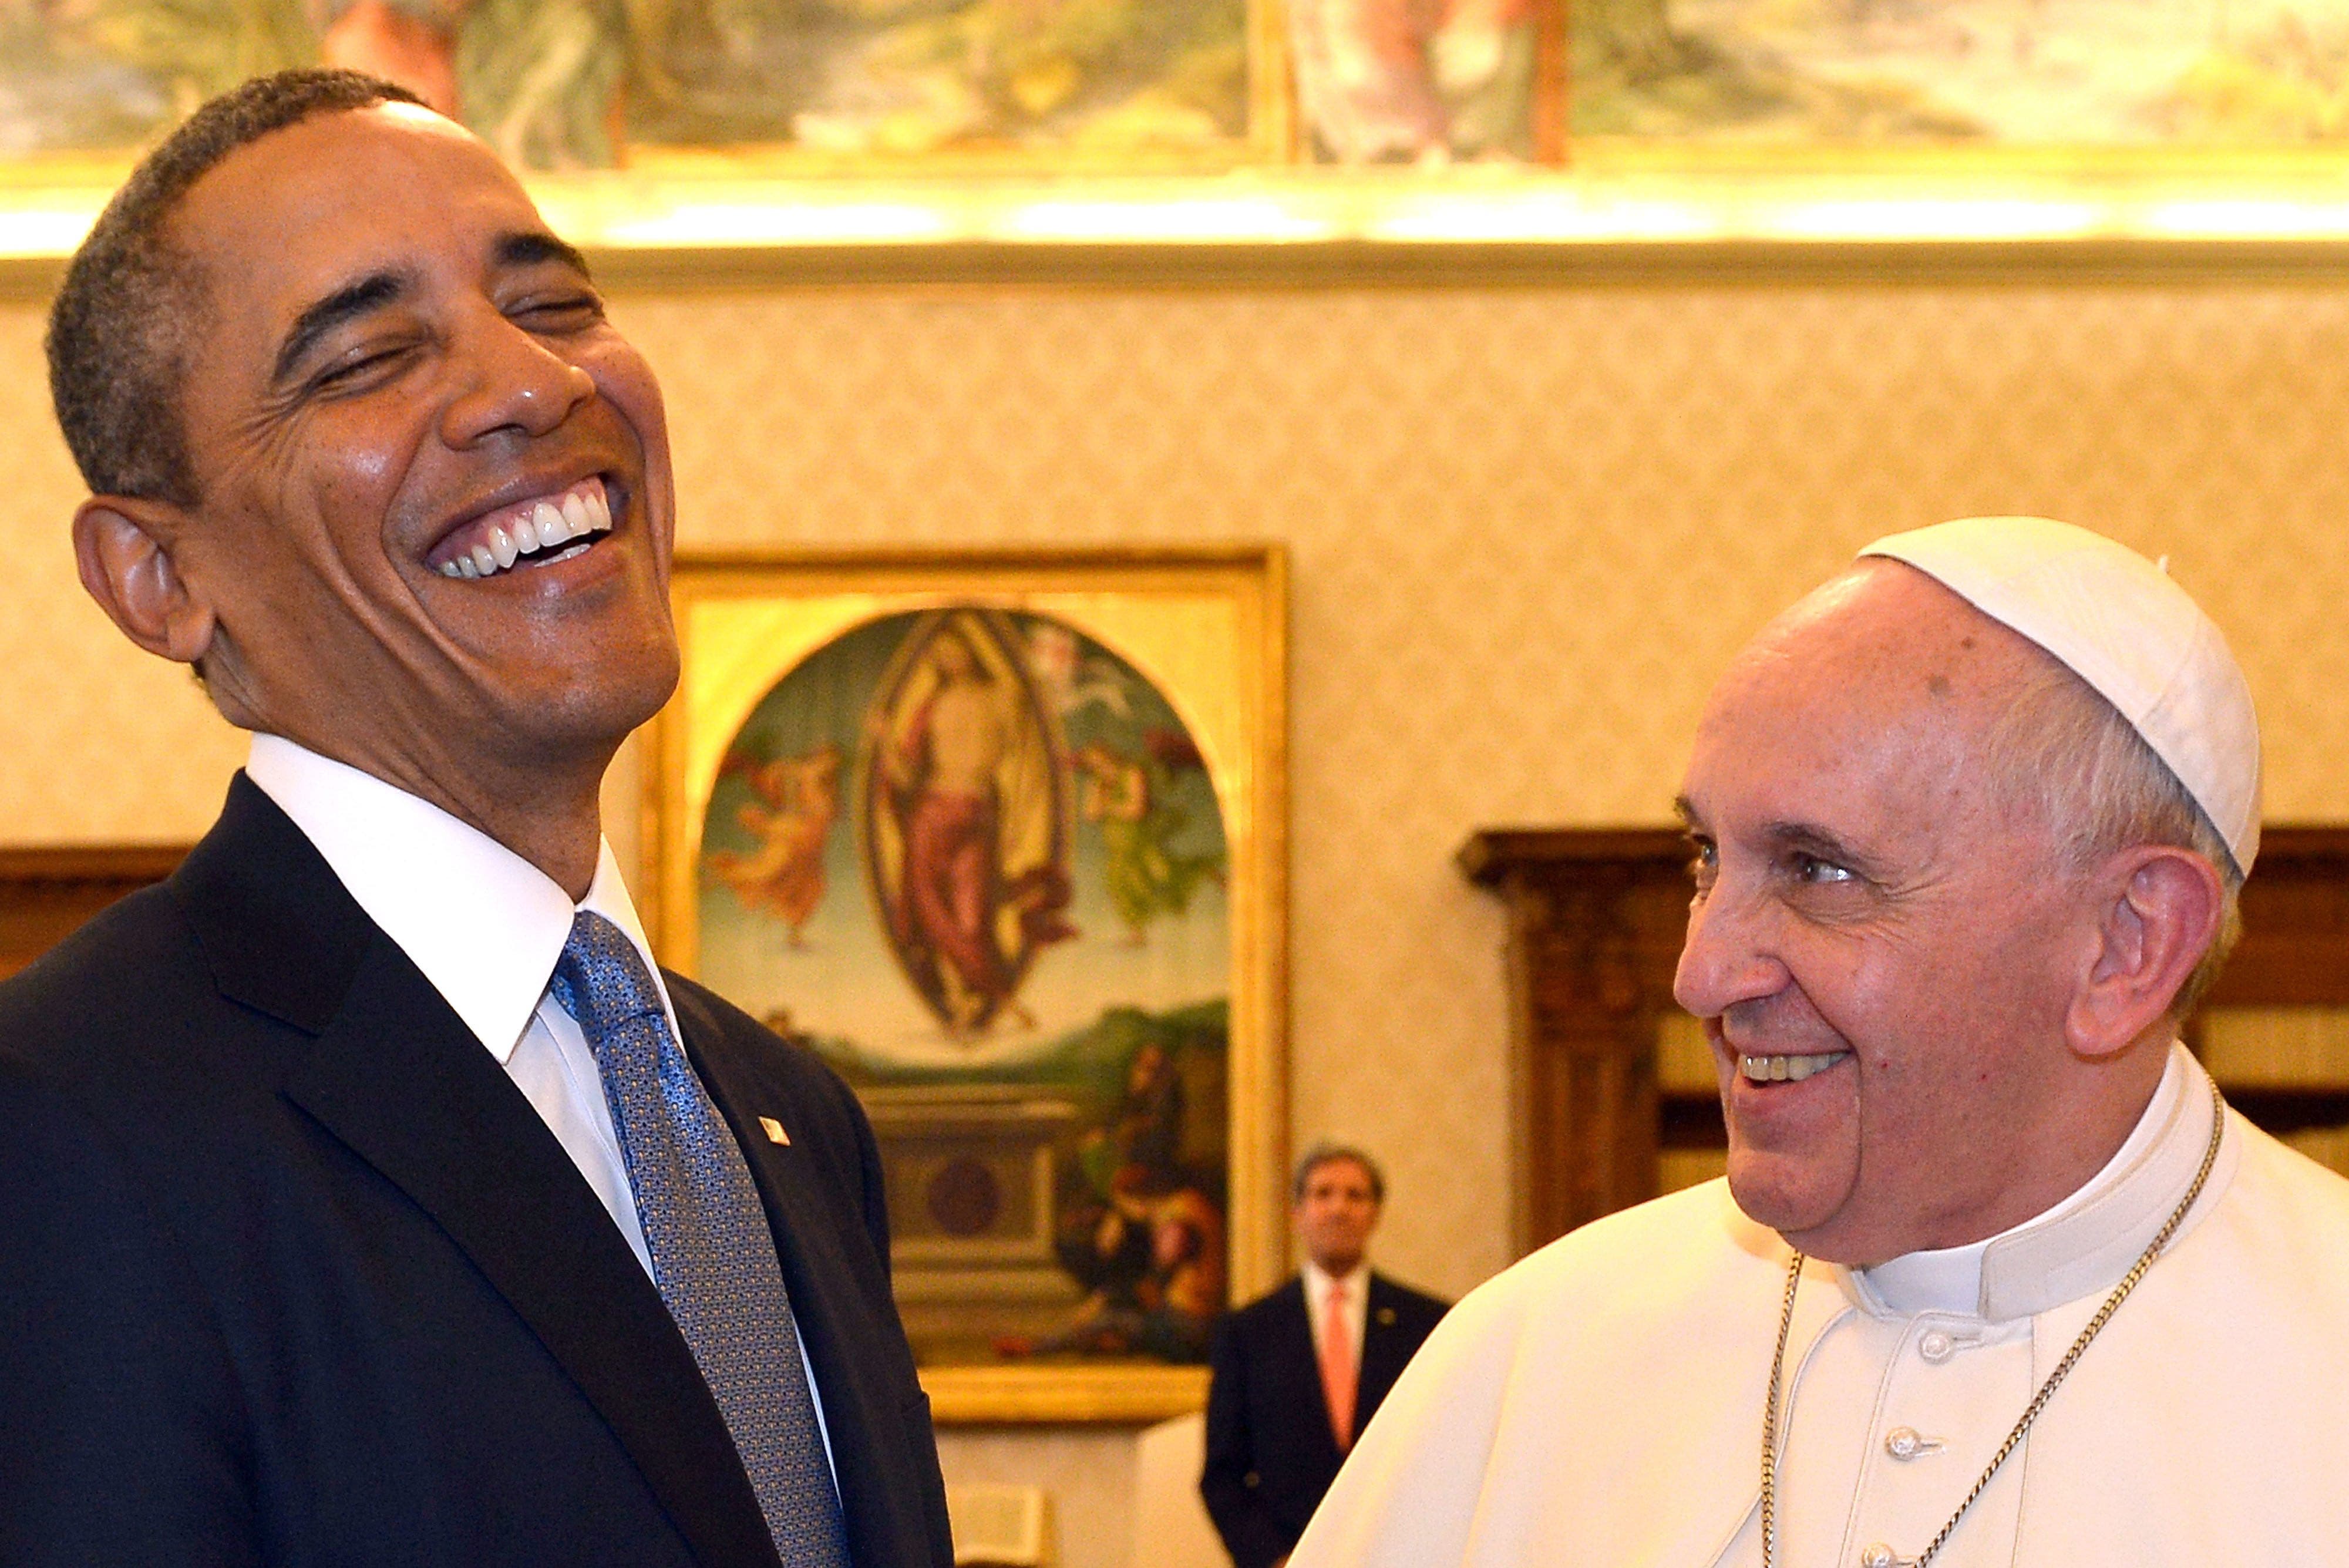 Pope Francis And President Obama Share The Spotlight, All Smiles